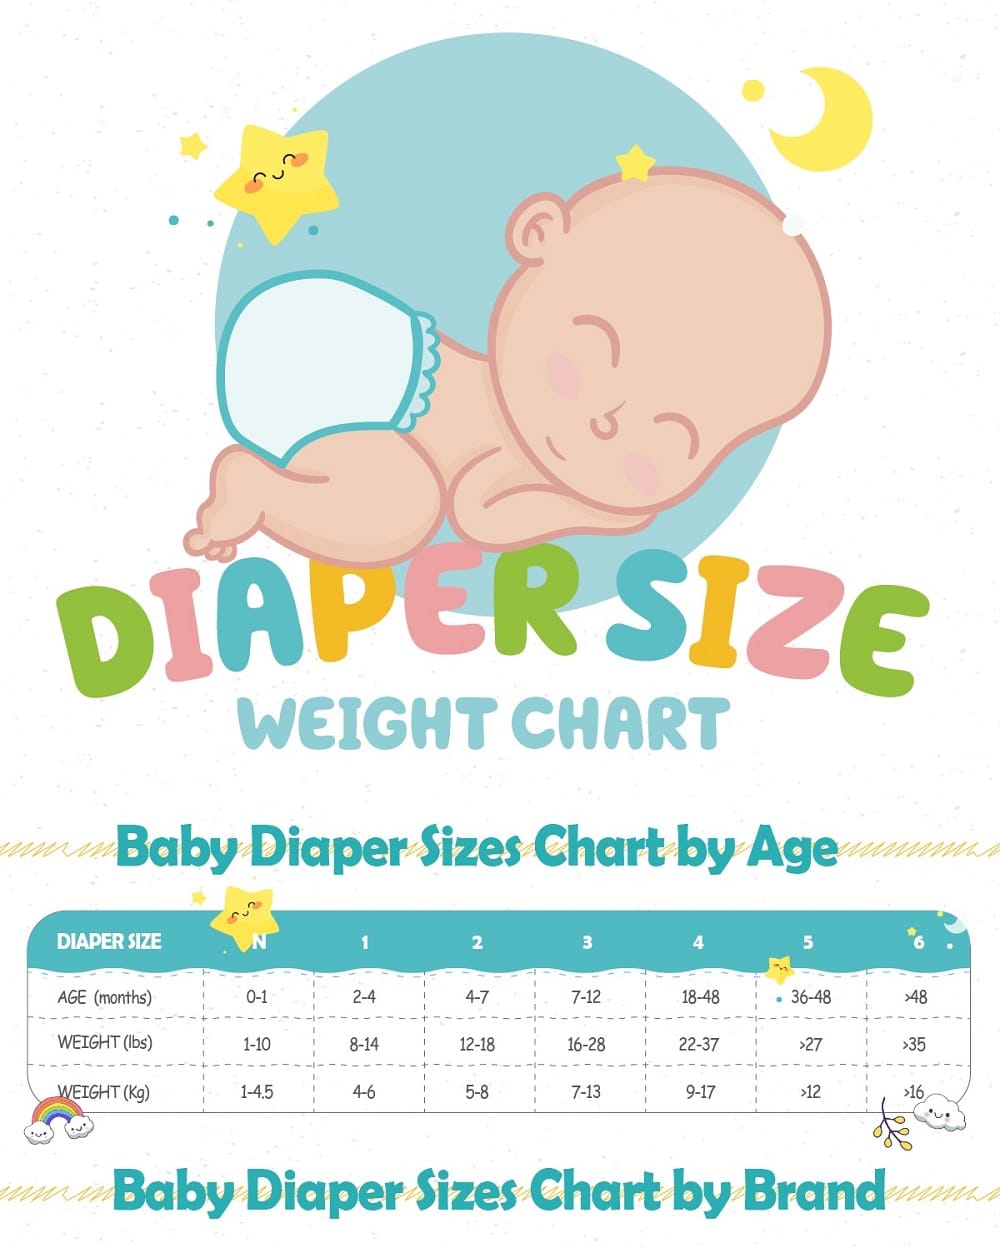 5 Quick Tips to Choose The Right Diaper for Baby